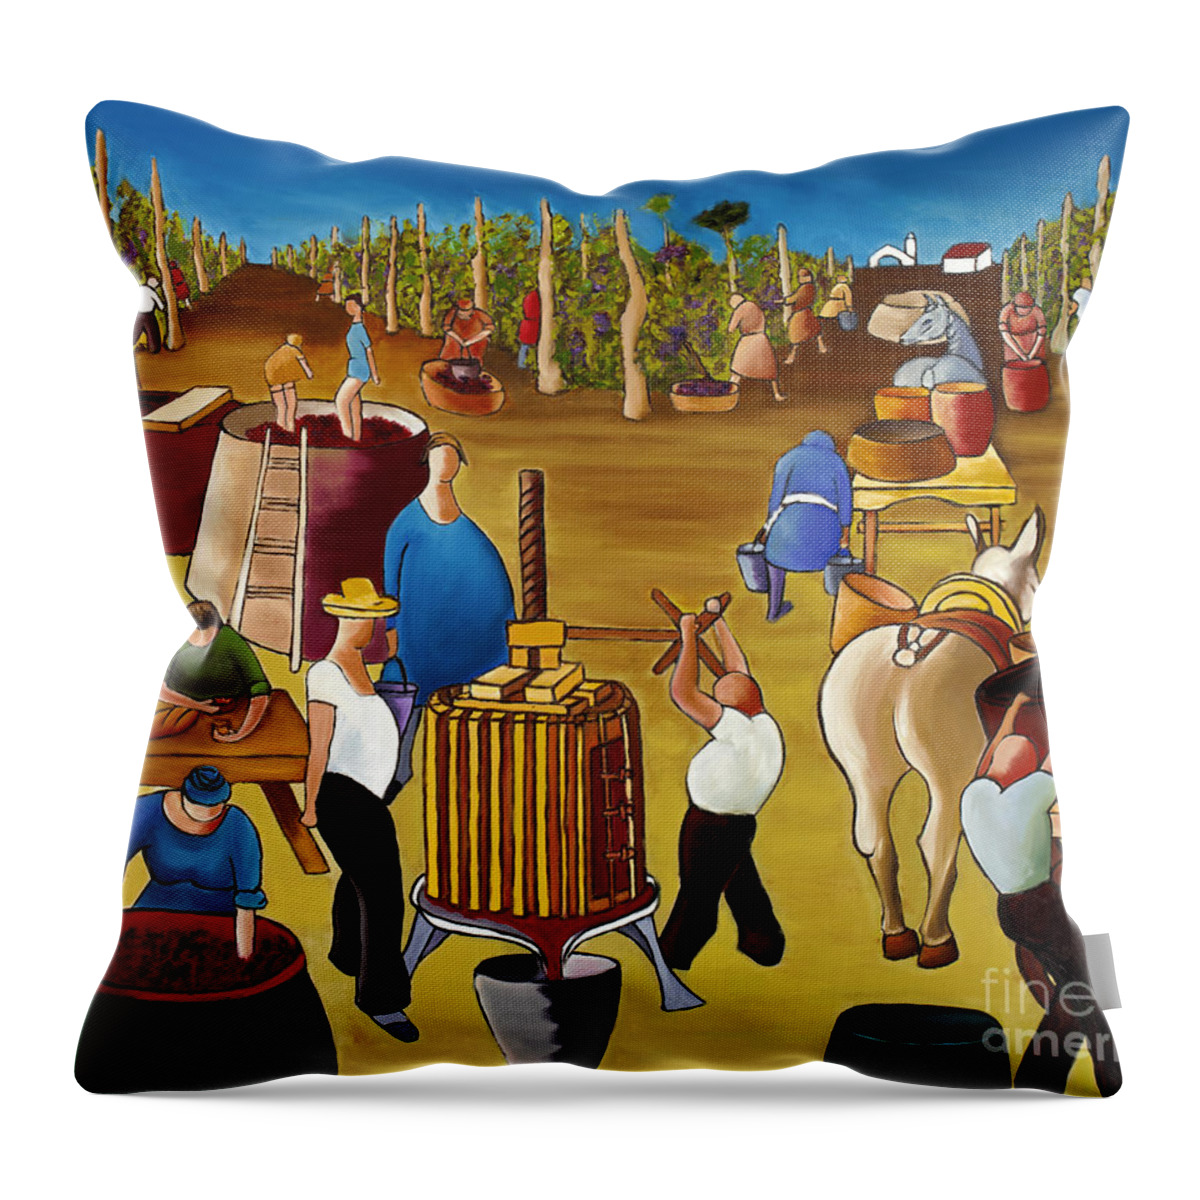 Mediterranean Canvas Art Throw Pillow featuring the painting Wine Pressing 2 by William Cain